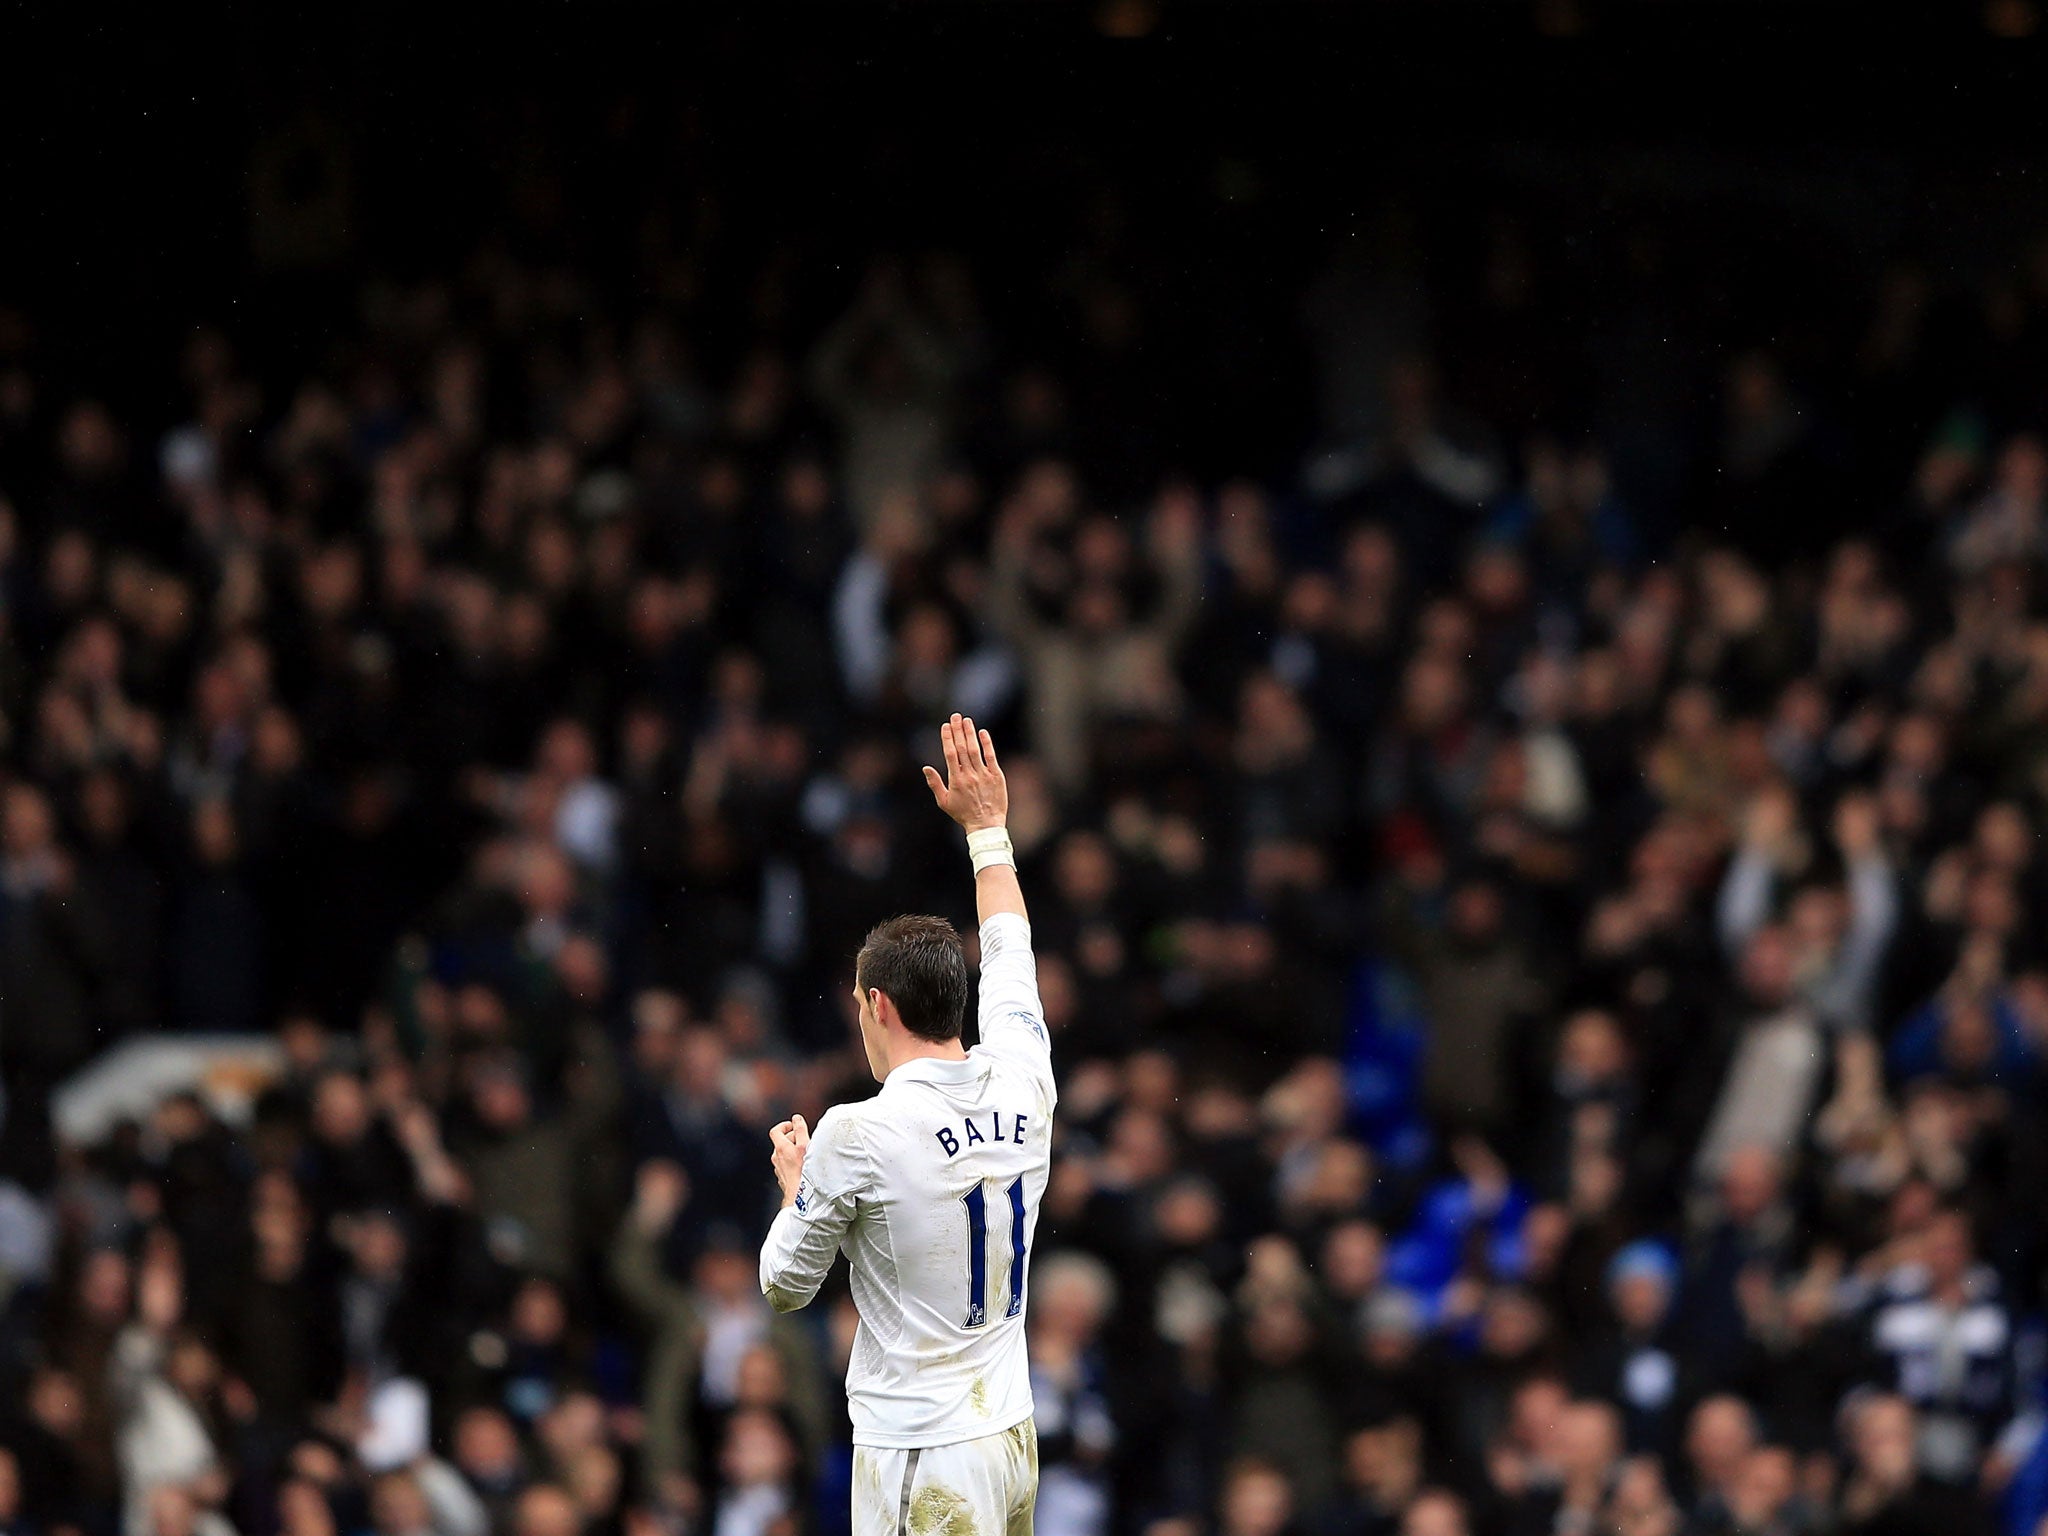 LONDON, ENGLAND - FEBRUARY 2013: Gareth Bale of Tottenham applaudes the fans at the final whistle during the Barclay's Premier League match between Tottenham Hotspur and Newcastle United at White Hart Lane. GETTY IMAGES